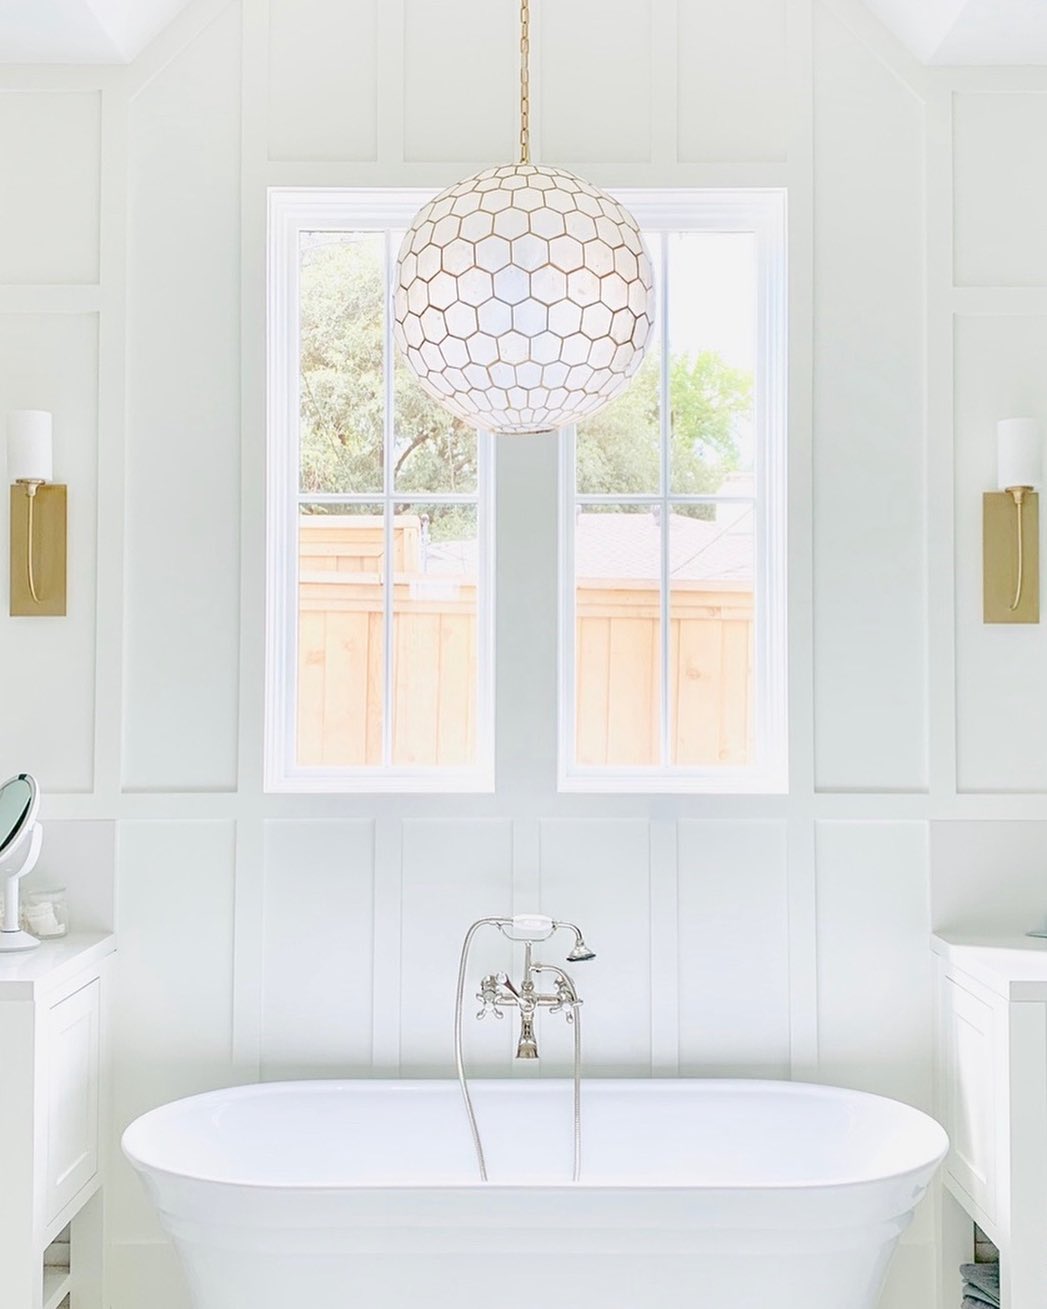 Freestanding bathtub with white picture windows above and a glass pendant light